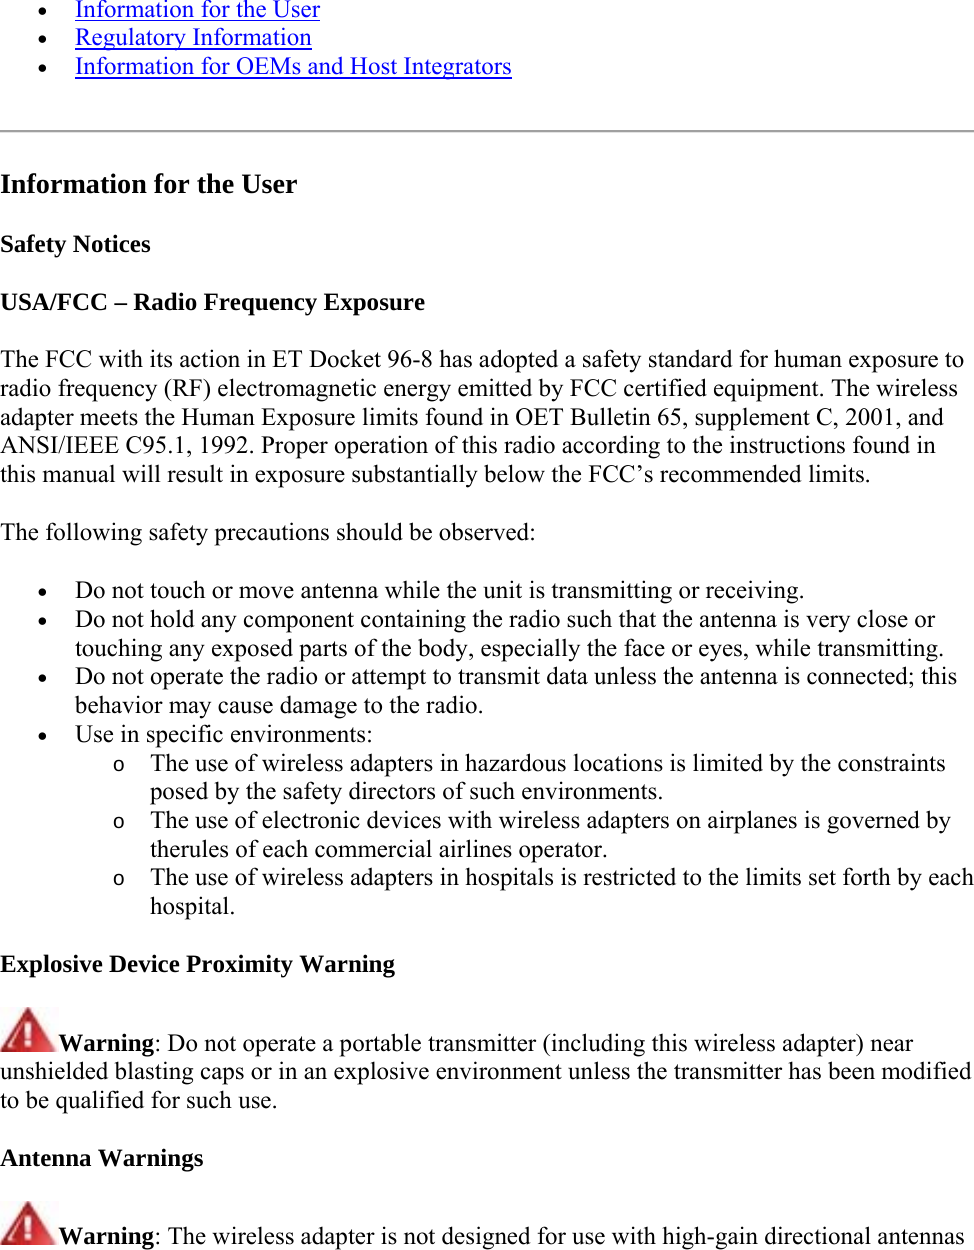  Information for the User  Regulatory Information    Information for OEMs and Host Integrators    Information for the User Safety Notices USA/FCC – Radio Frequency Exposure The FCC with its action in ET Docket 96-8 has adopted a safety standard for human exposure to radio frequency (RF) electromagnetic energy emitted by FCC certified equipment. The wireless adapter meets the Human Exposure limits found in OET Bulletin 65, supplement C, 2001, and ANSI/IEEE C95.1, 1992. Proper operation of this radio according to the instructions found in this manual will result in exposure substantially below the FCC’s recommended limits. The following safety precautions should be observed:  Do not touch or move antenna while the unit is transmitting or receiving.  Do not hold any component containing the radio such that the antenna is very close or touching any exposed parts of the body, especially the face or eyes, while transmitting.  Do not operate the radio or attempt to transmit data unless the antenna is connected; this behavior may cause damage to the radio.  Use in specific environments:  o The use of wireless adapters in hazardous locations is limited by the constraints posed by the safety directors of such environments. o The use of electronic devices with wireless adapters on airplanes is governed by therules of each commercial airlines operator. o The use of wireless adapters in hospitals is restricted to the limits set forth by each hospital. Explosive Device Proximity Warning Warning: Do not operate a portable transmitter (including this wireless adapter) near unshielded blasting caps or in an explosive environment unless the transmitter has been modified to be qualified for such use. Antenna Warnings Warning: The wireless adapter is not designed for use with high-gain directional antennas  